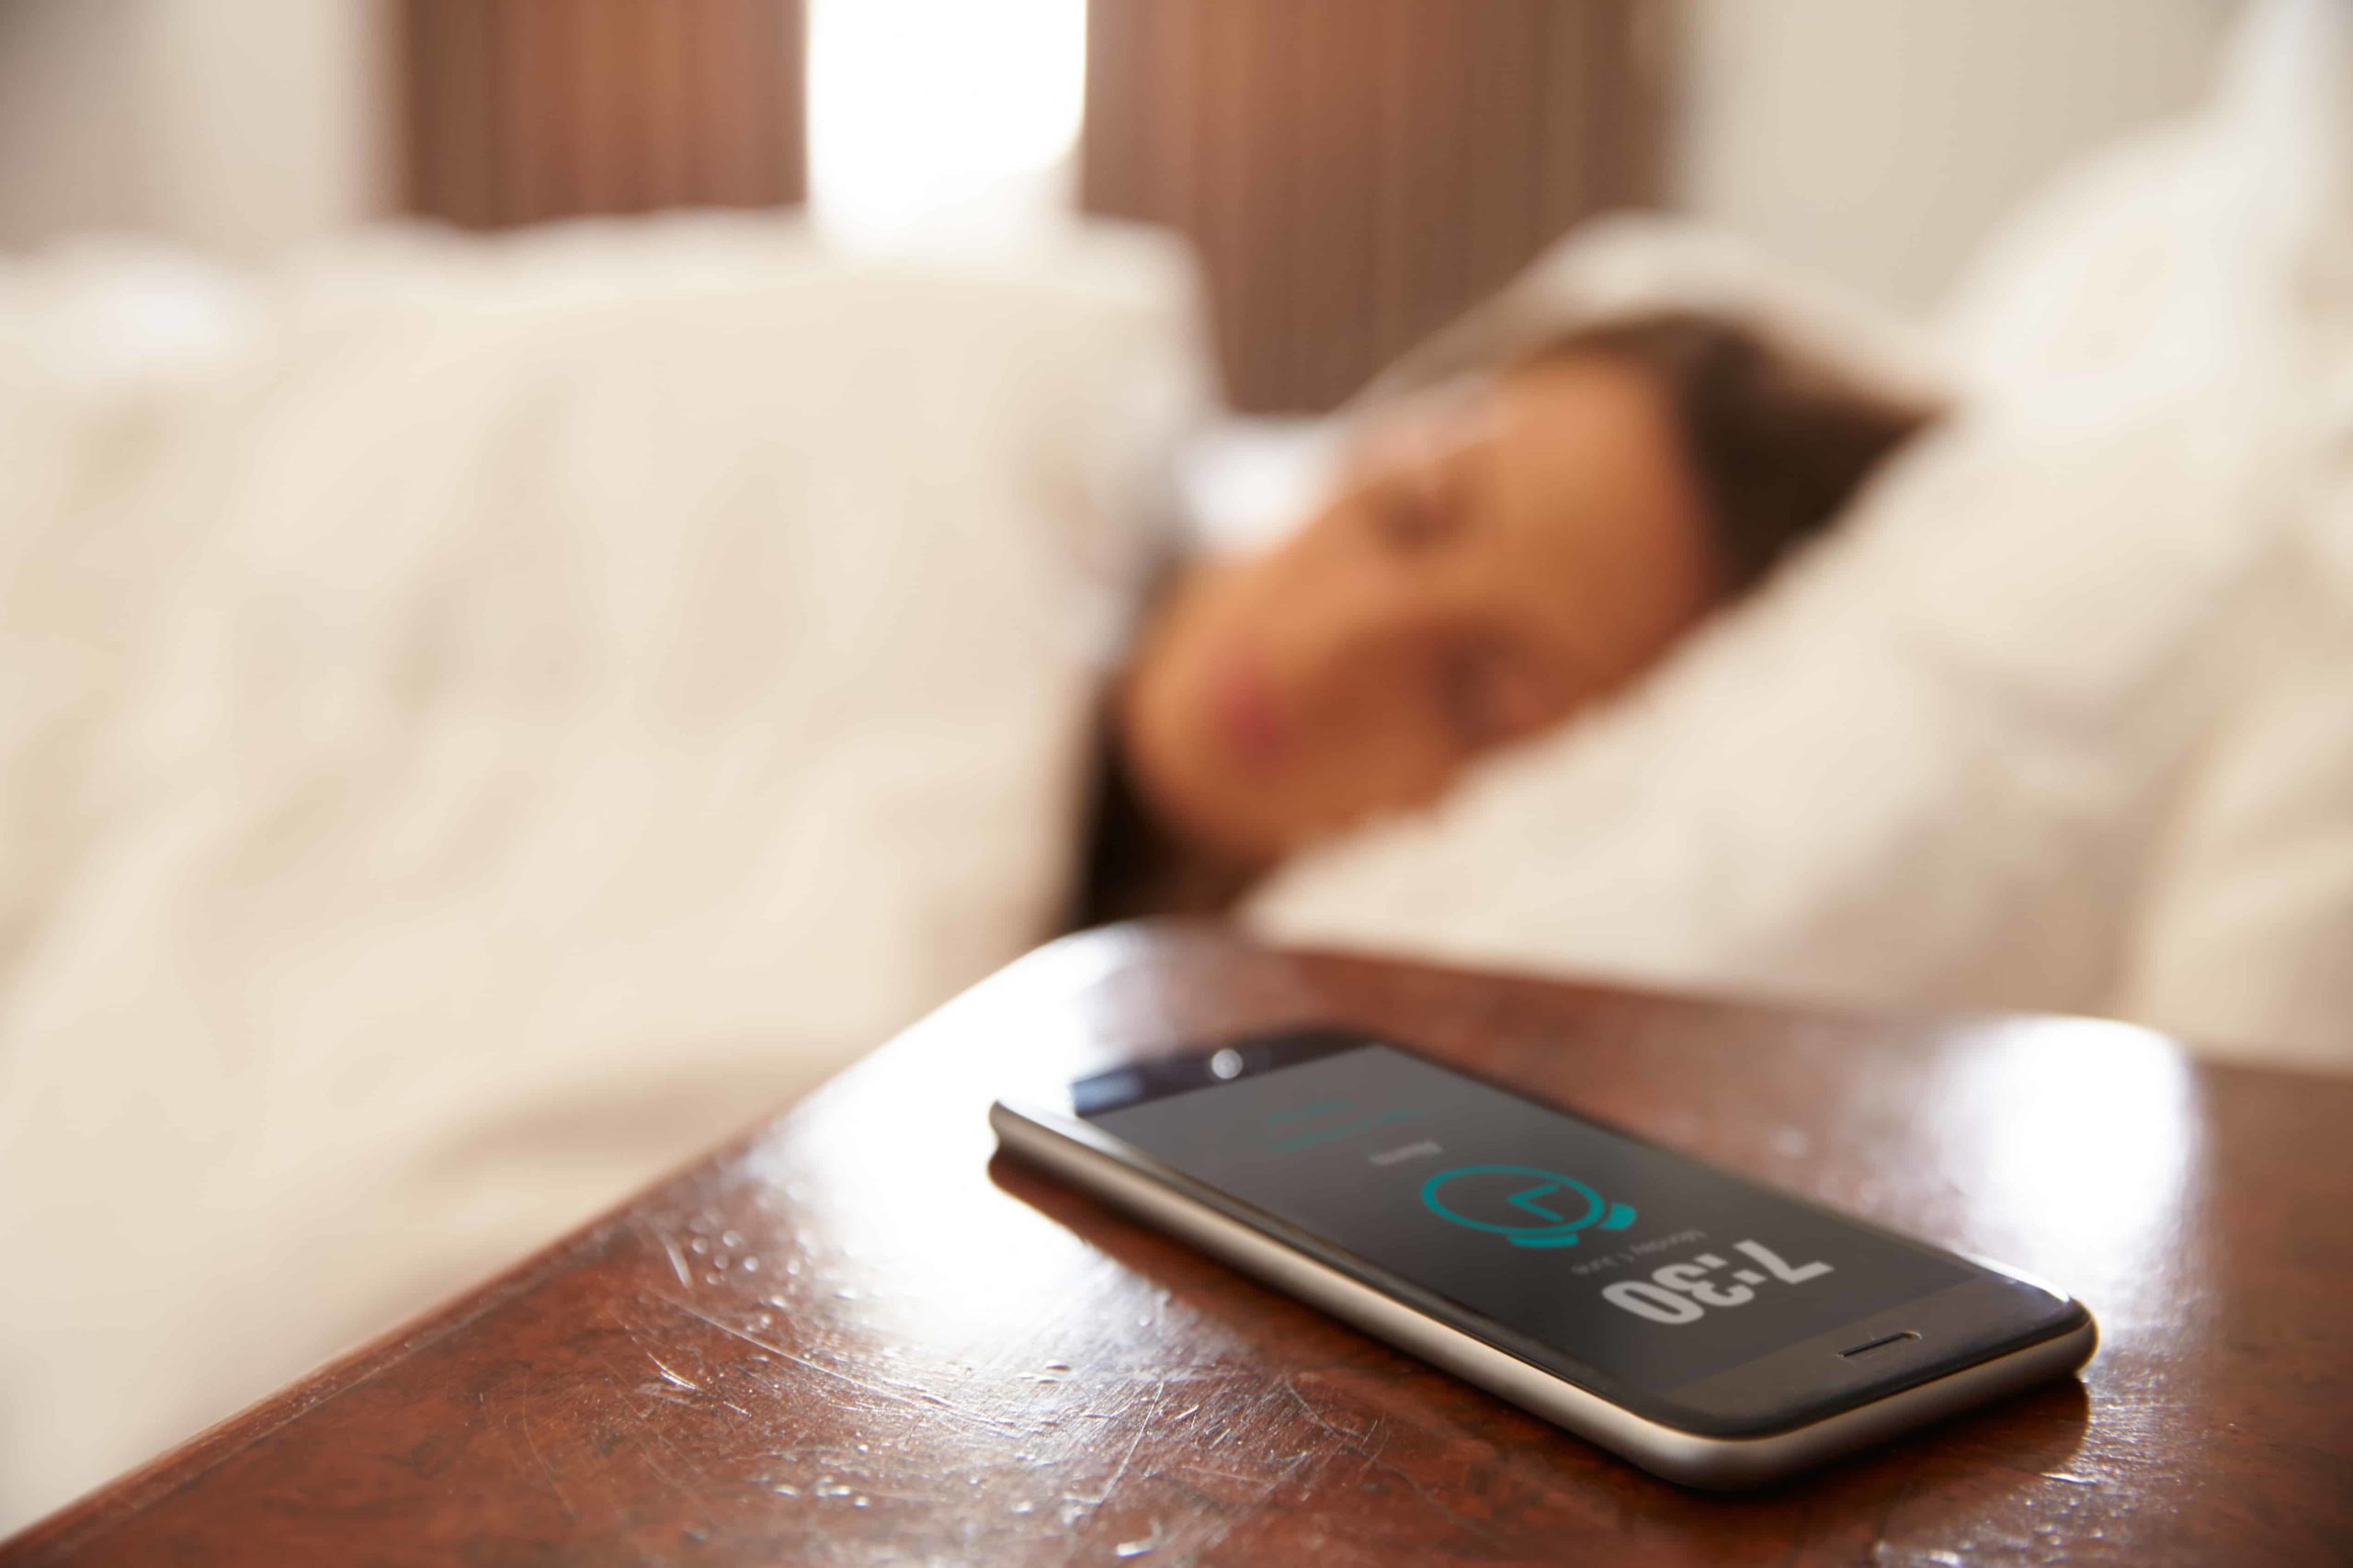 Cell phone alarm is going off while woman is in bed asleep